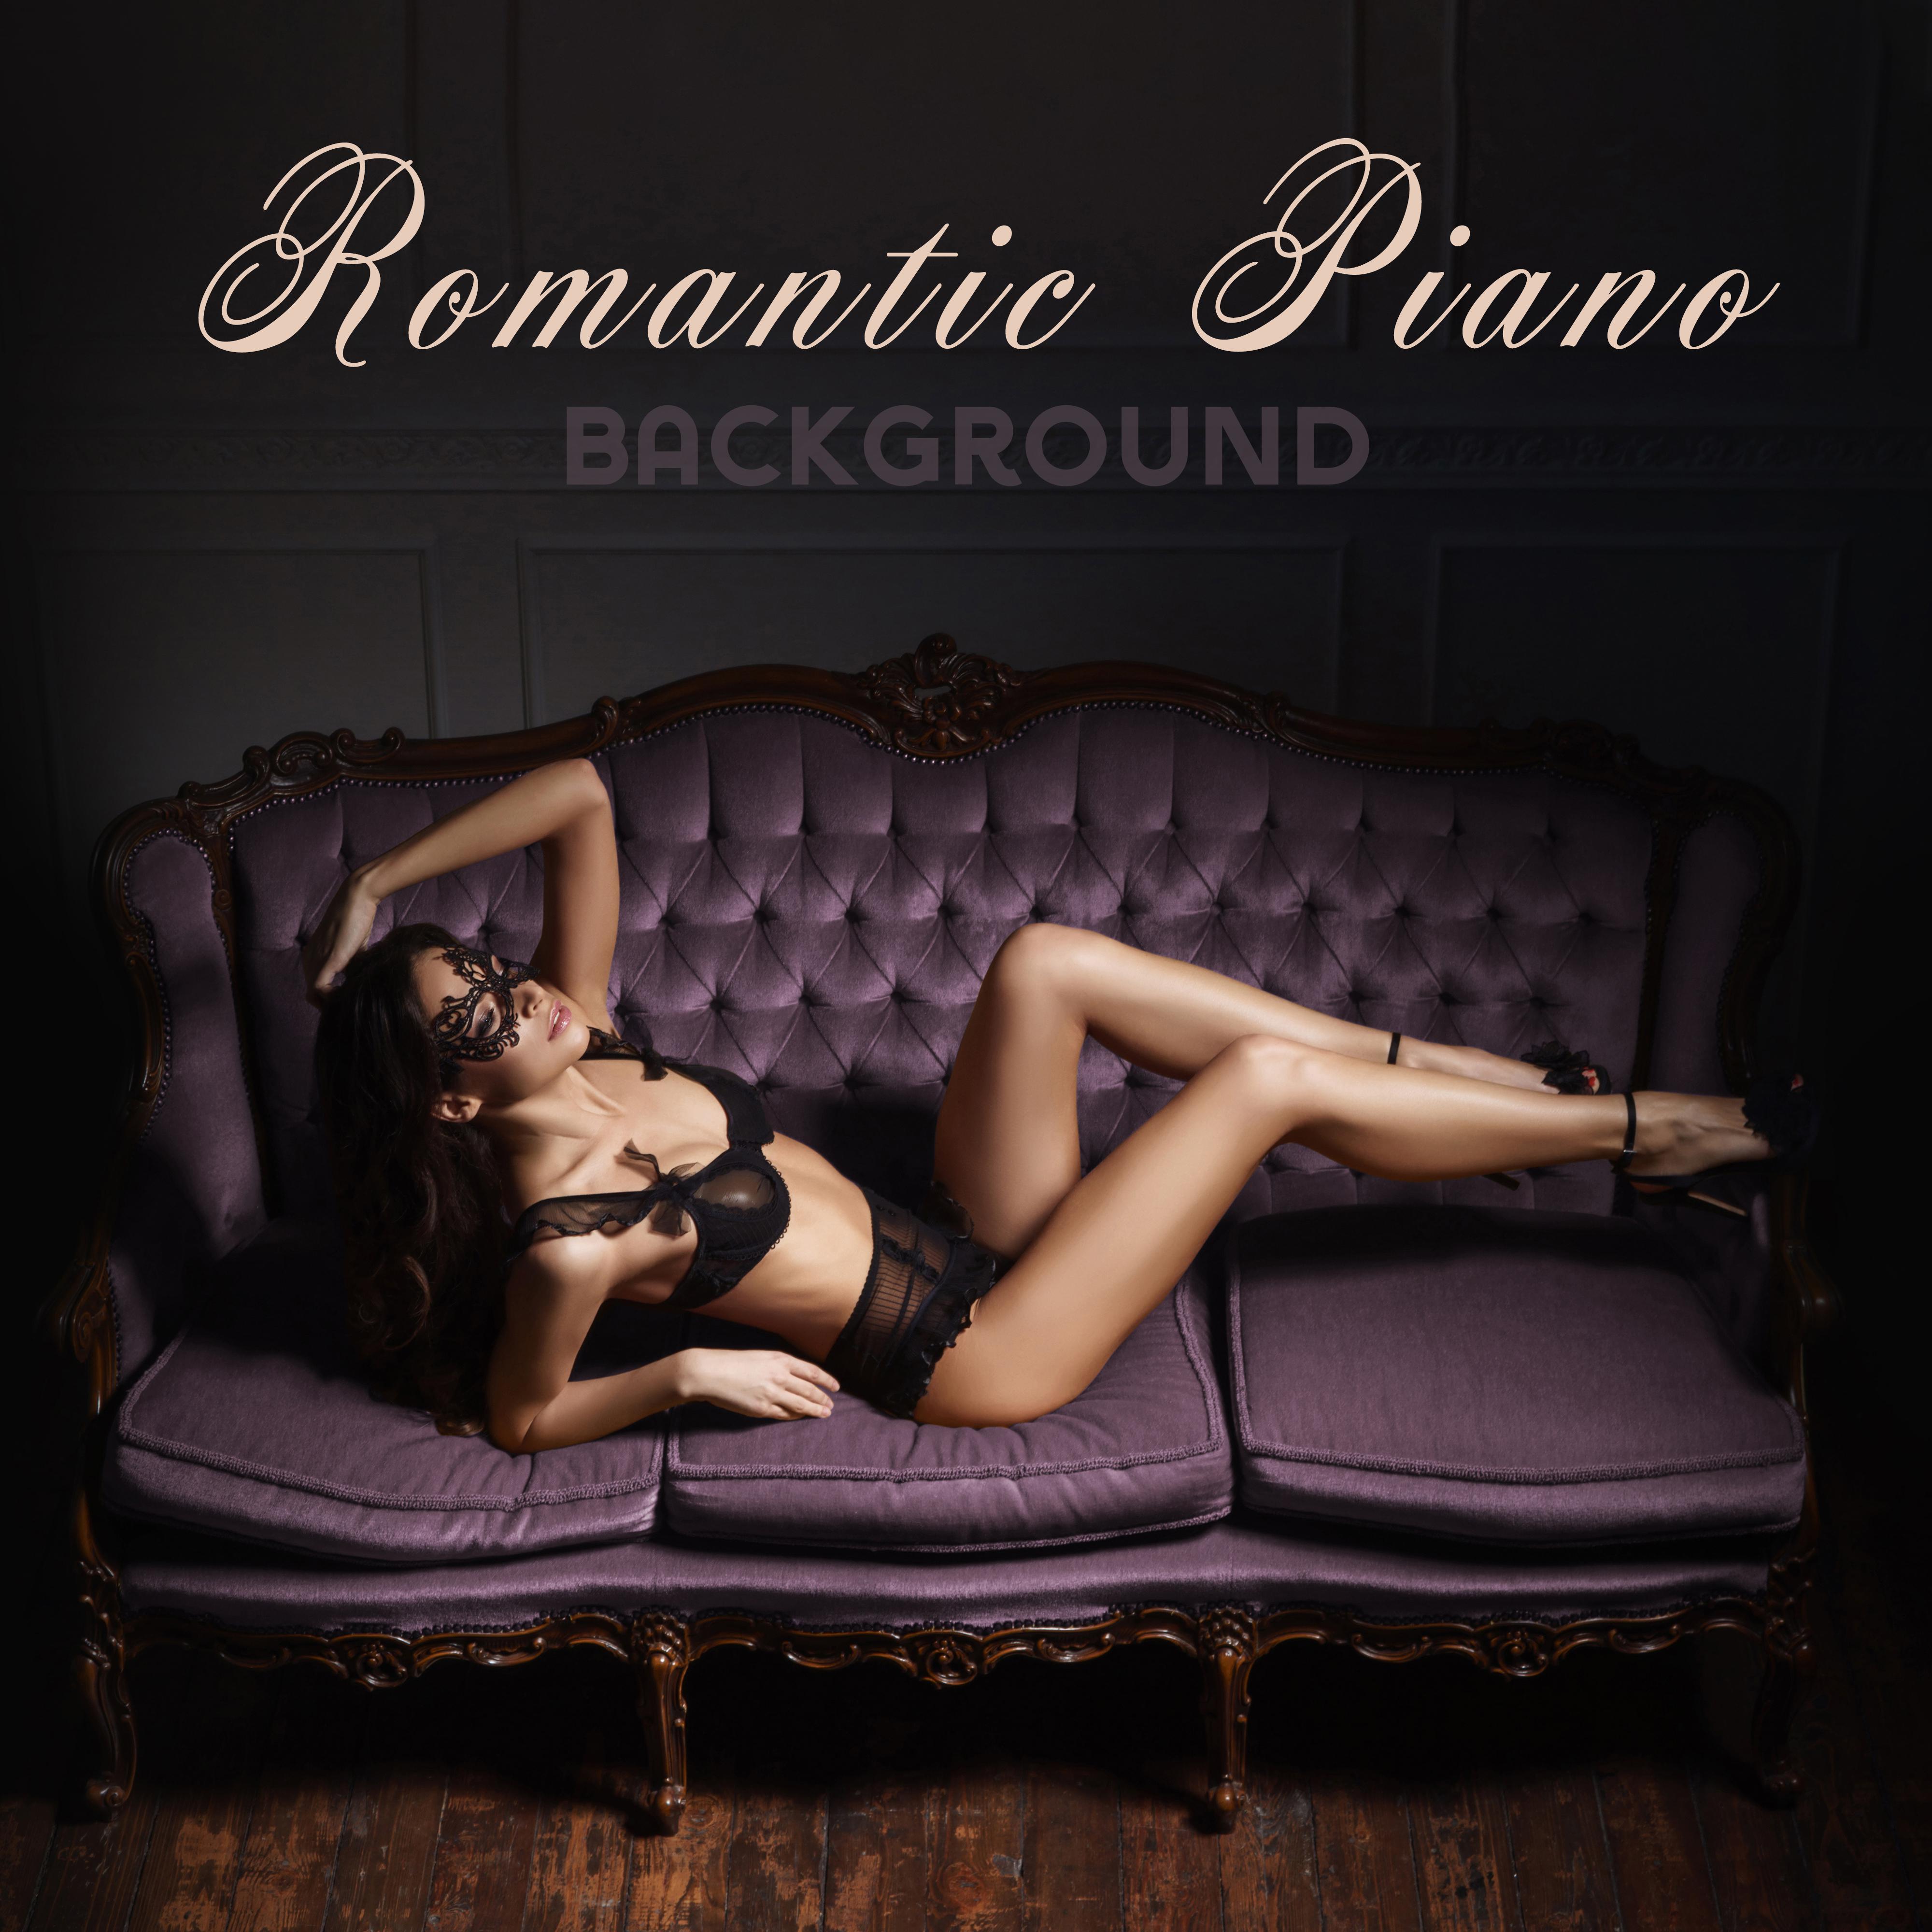 Romantic Piano Background: Collection of Instrumental Songs for Lovers for a Date, Romantic Dinner or an Evening Only for Two